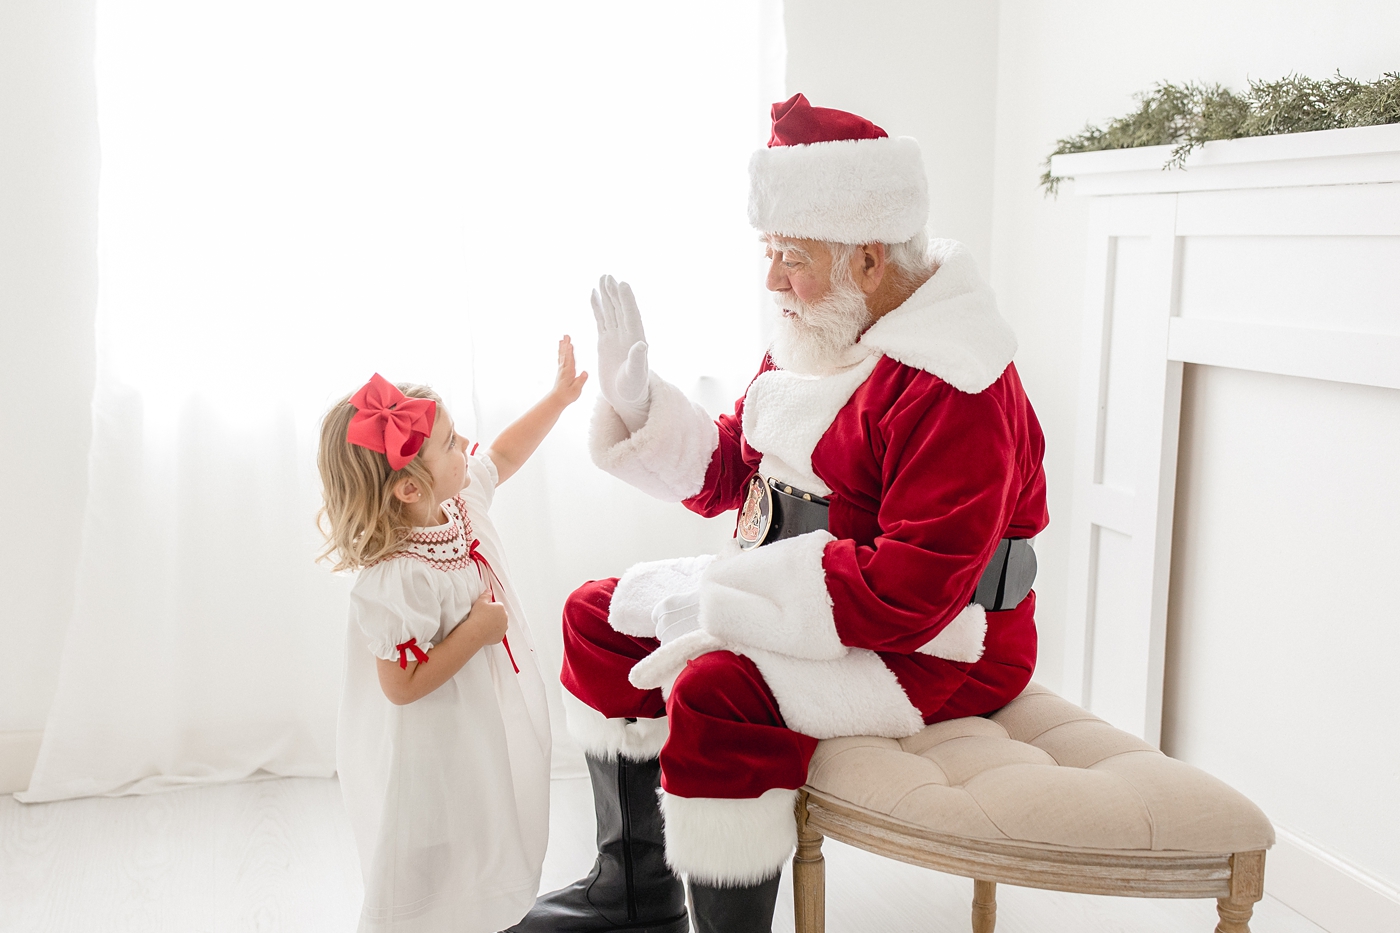 Little girl high fives Santa Claus during Miami studio session. Photo by Ivanna Vidal Photography.